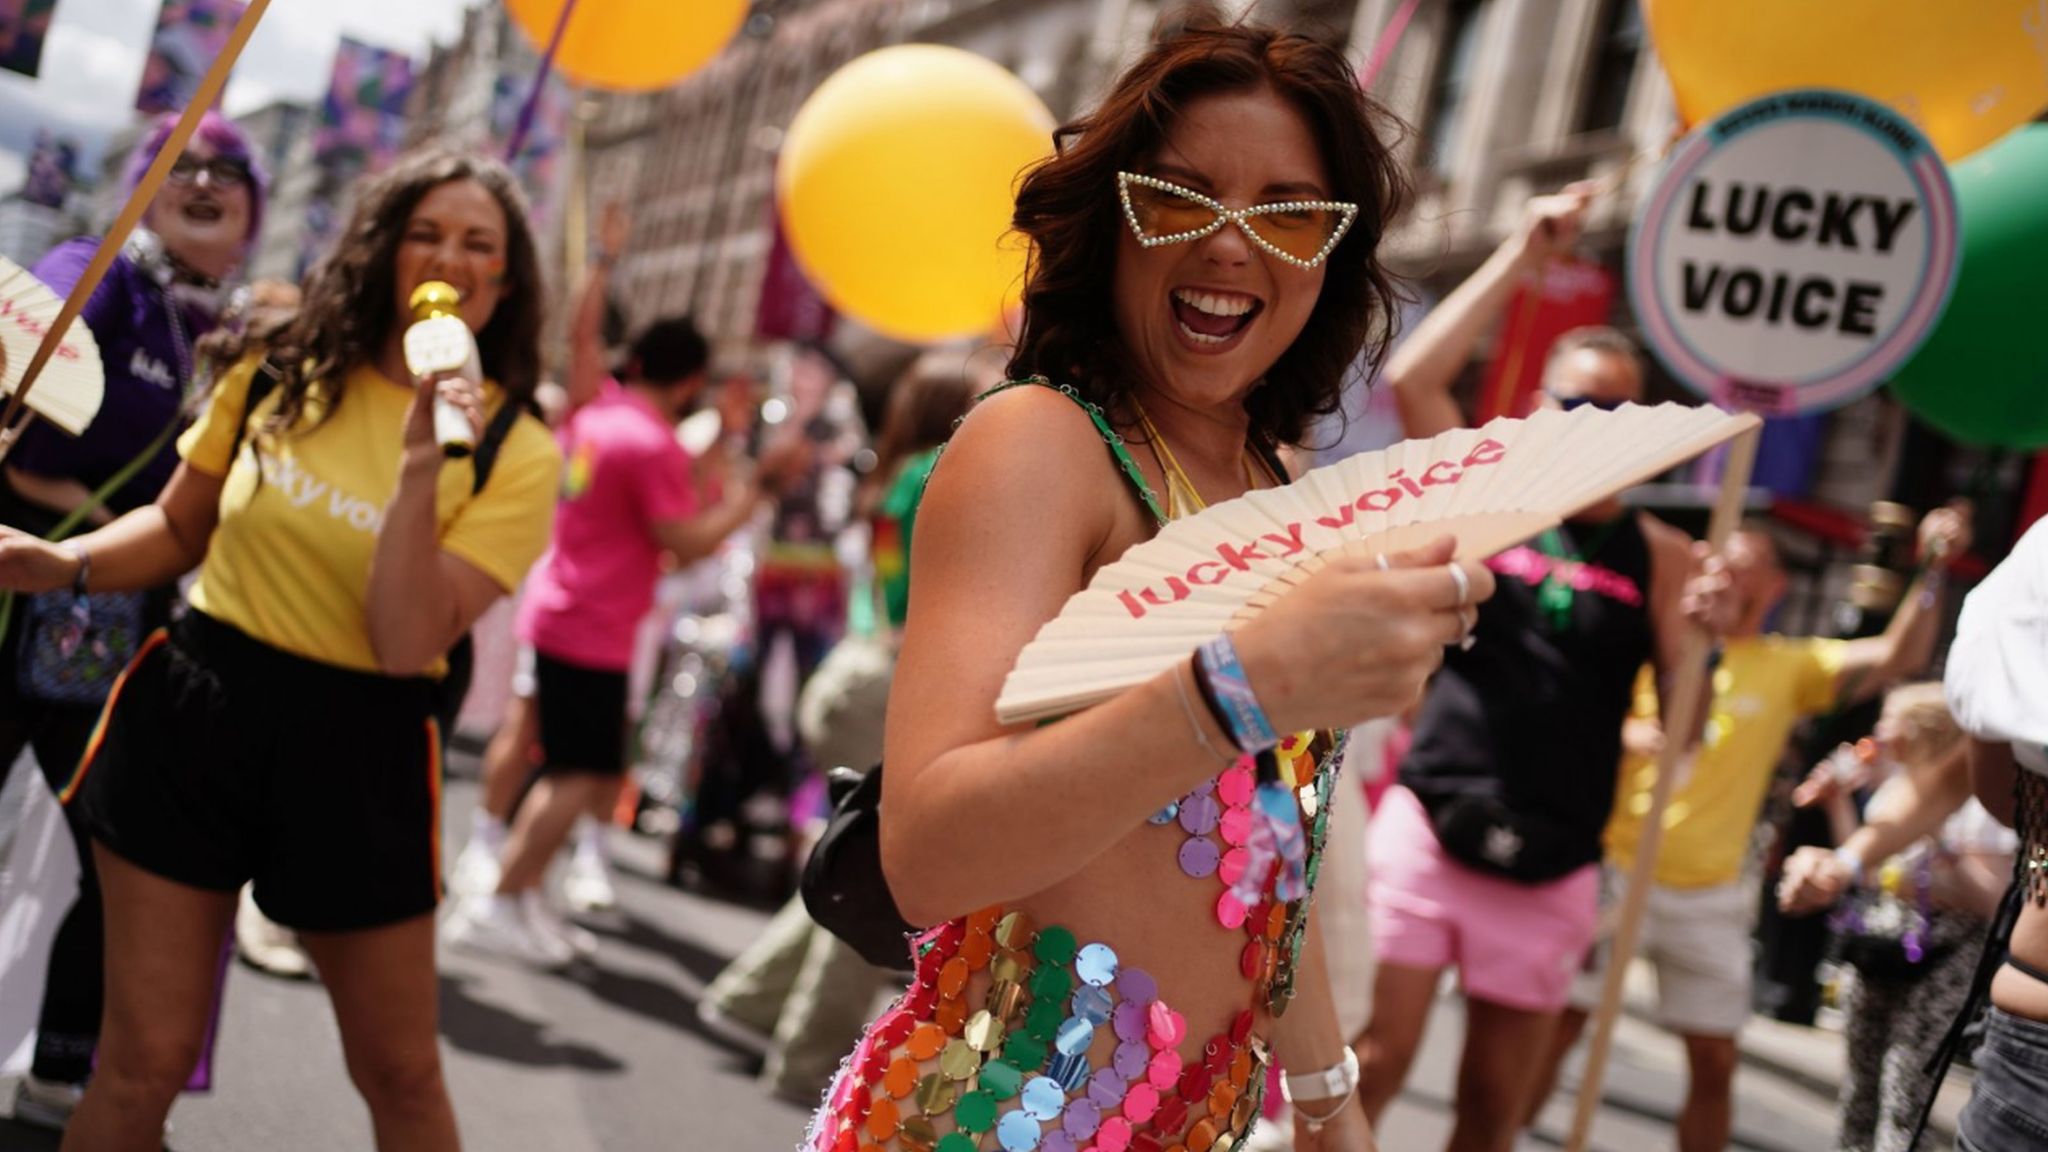 Woman waves a fan on Piccadilly during Pride march